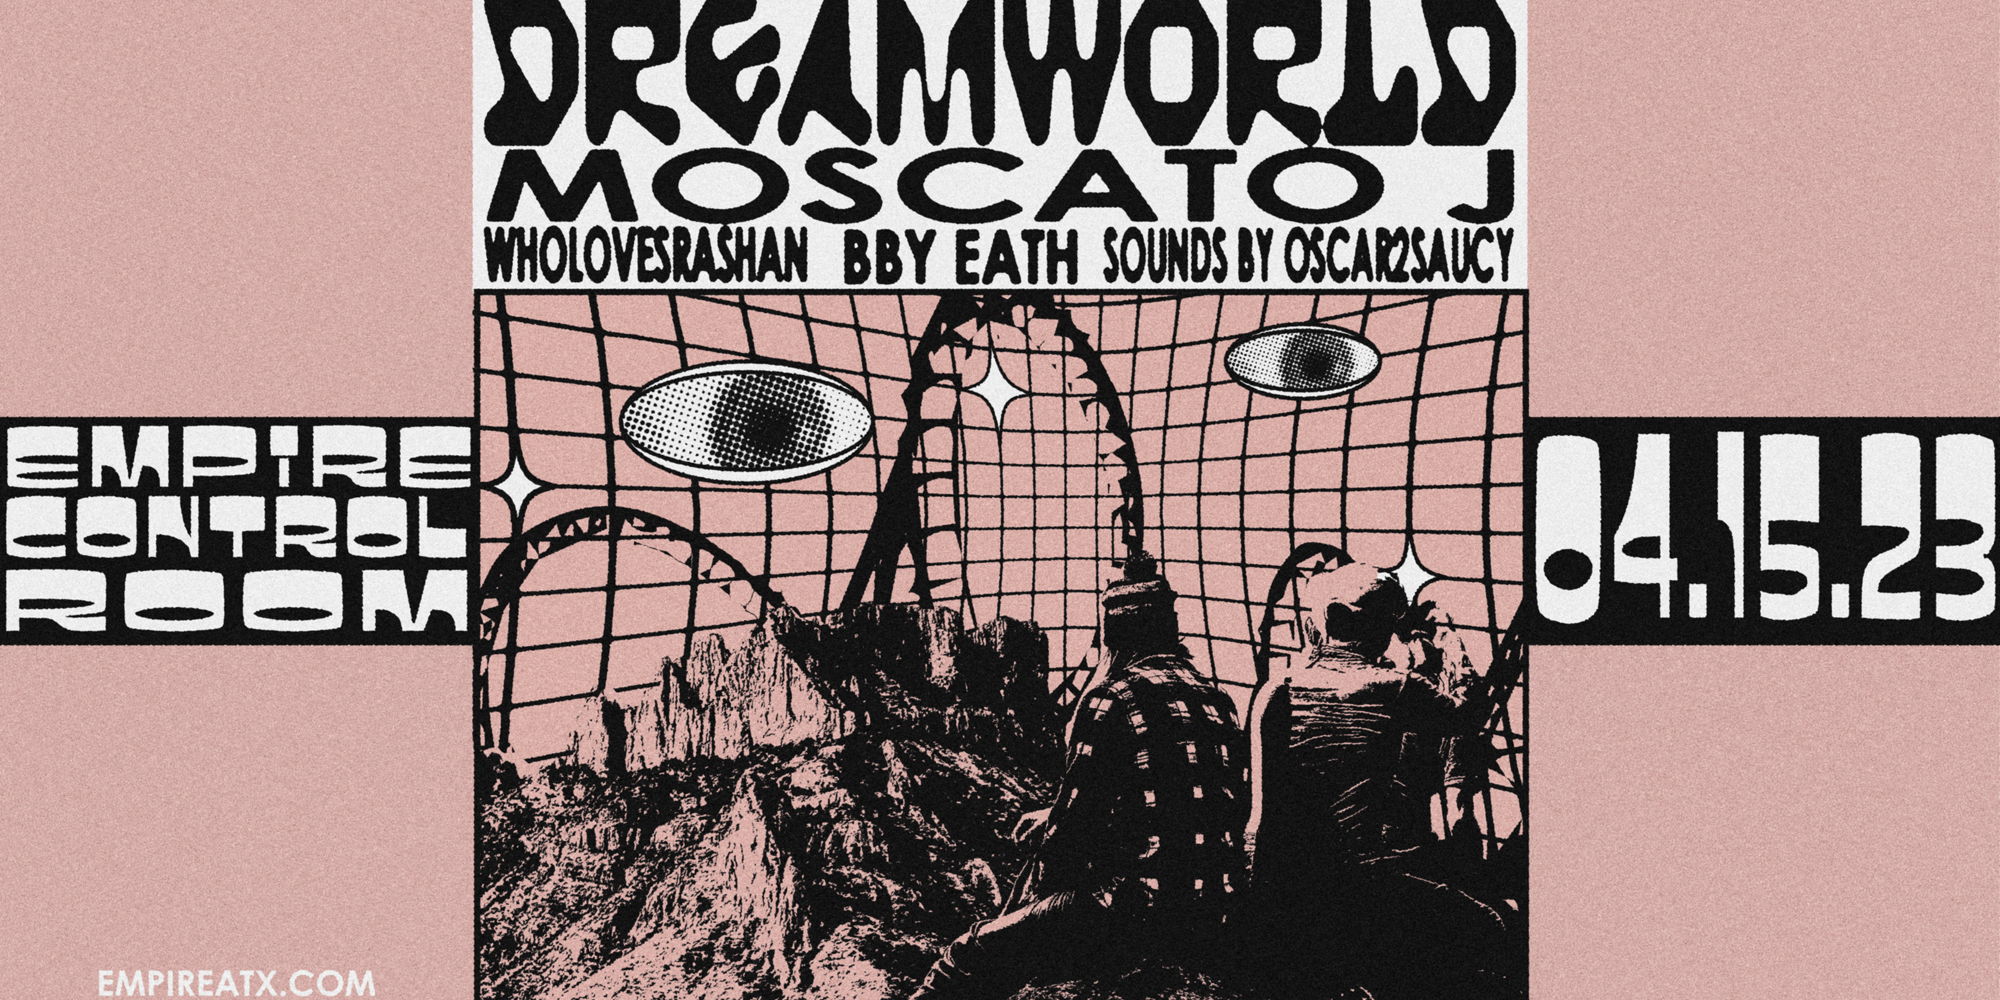 Empire Presents: Dreamworld W/ Mosacato J, WhoLovesRashan And BBY EATH, Sounds By Oscar2Saucy At Empire On 4/15 promotional image